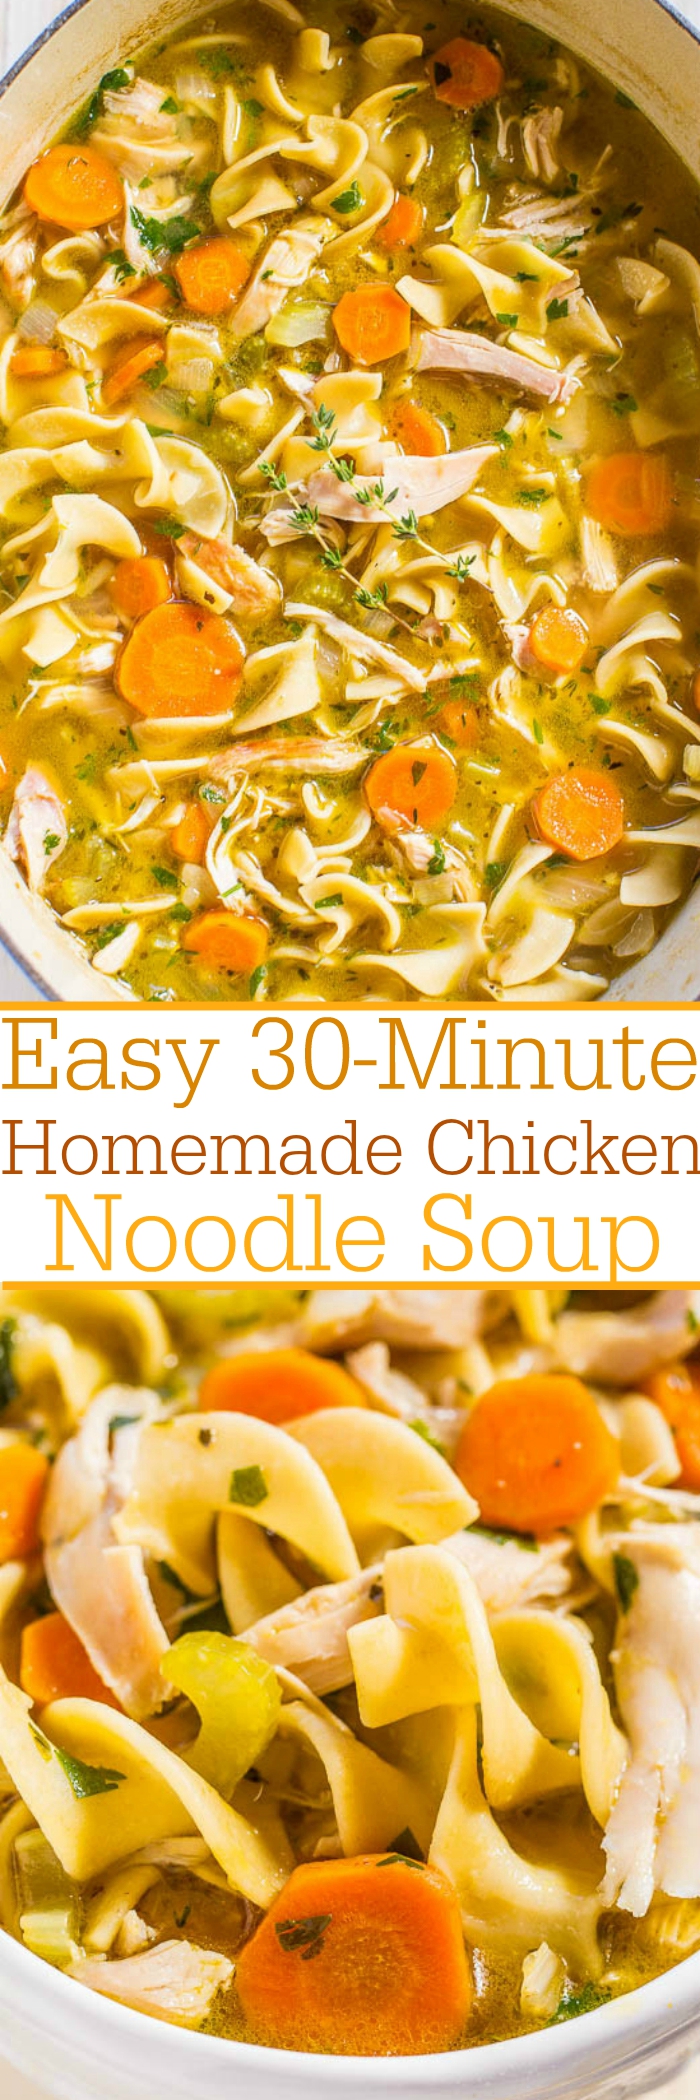 Easy Homemade Chicken Noodle Soup Recipe – How to Make Best Chicken Noodle  Soup